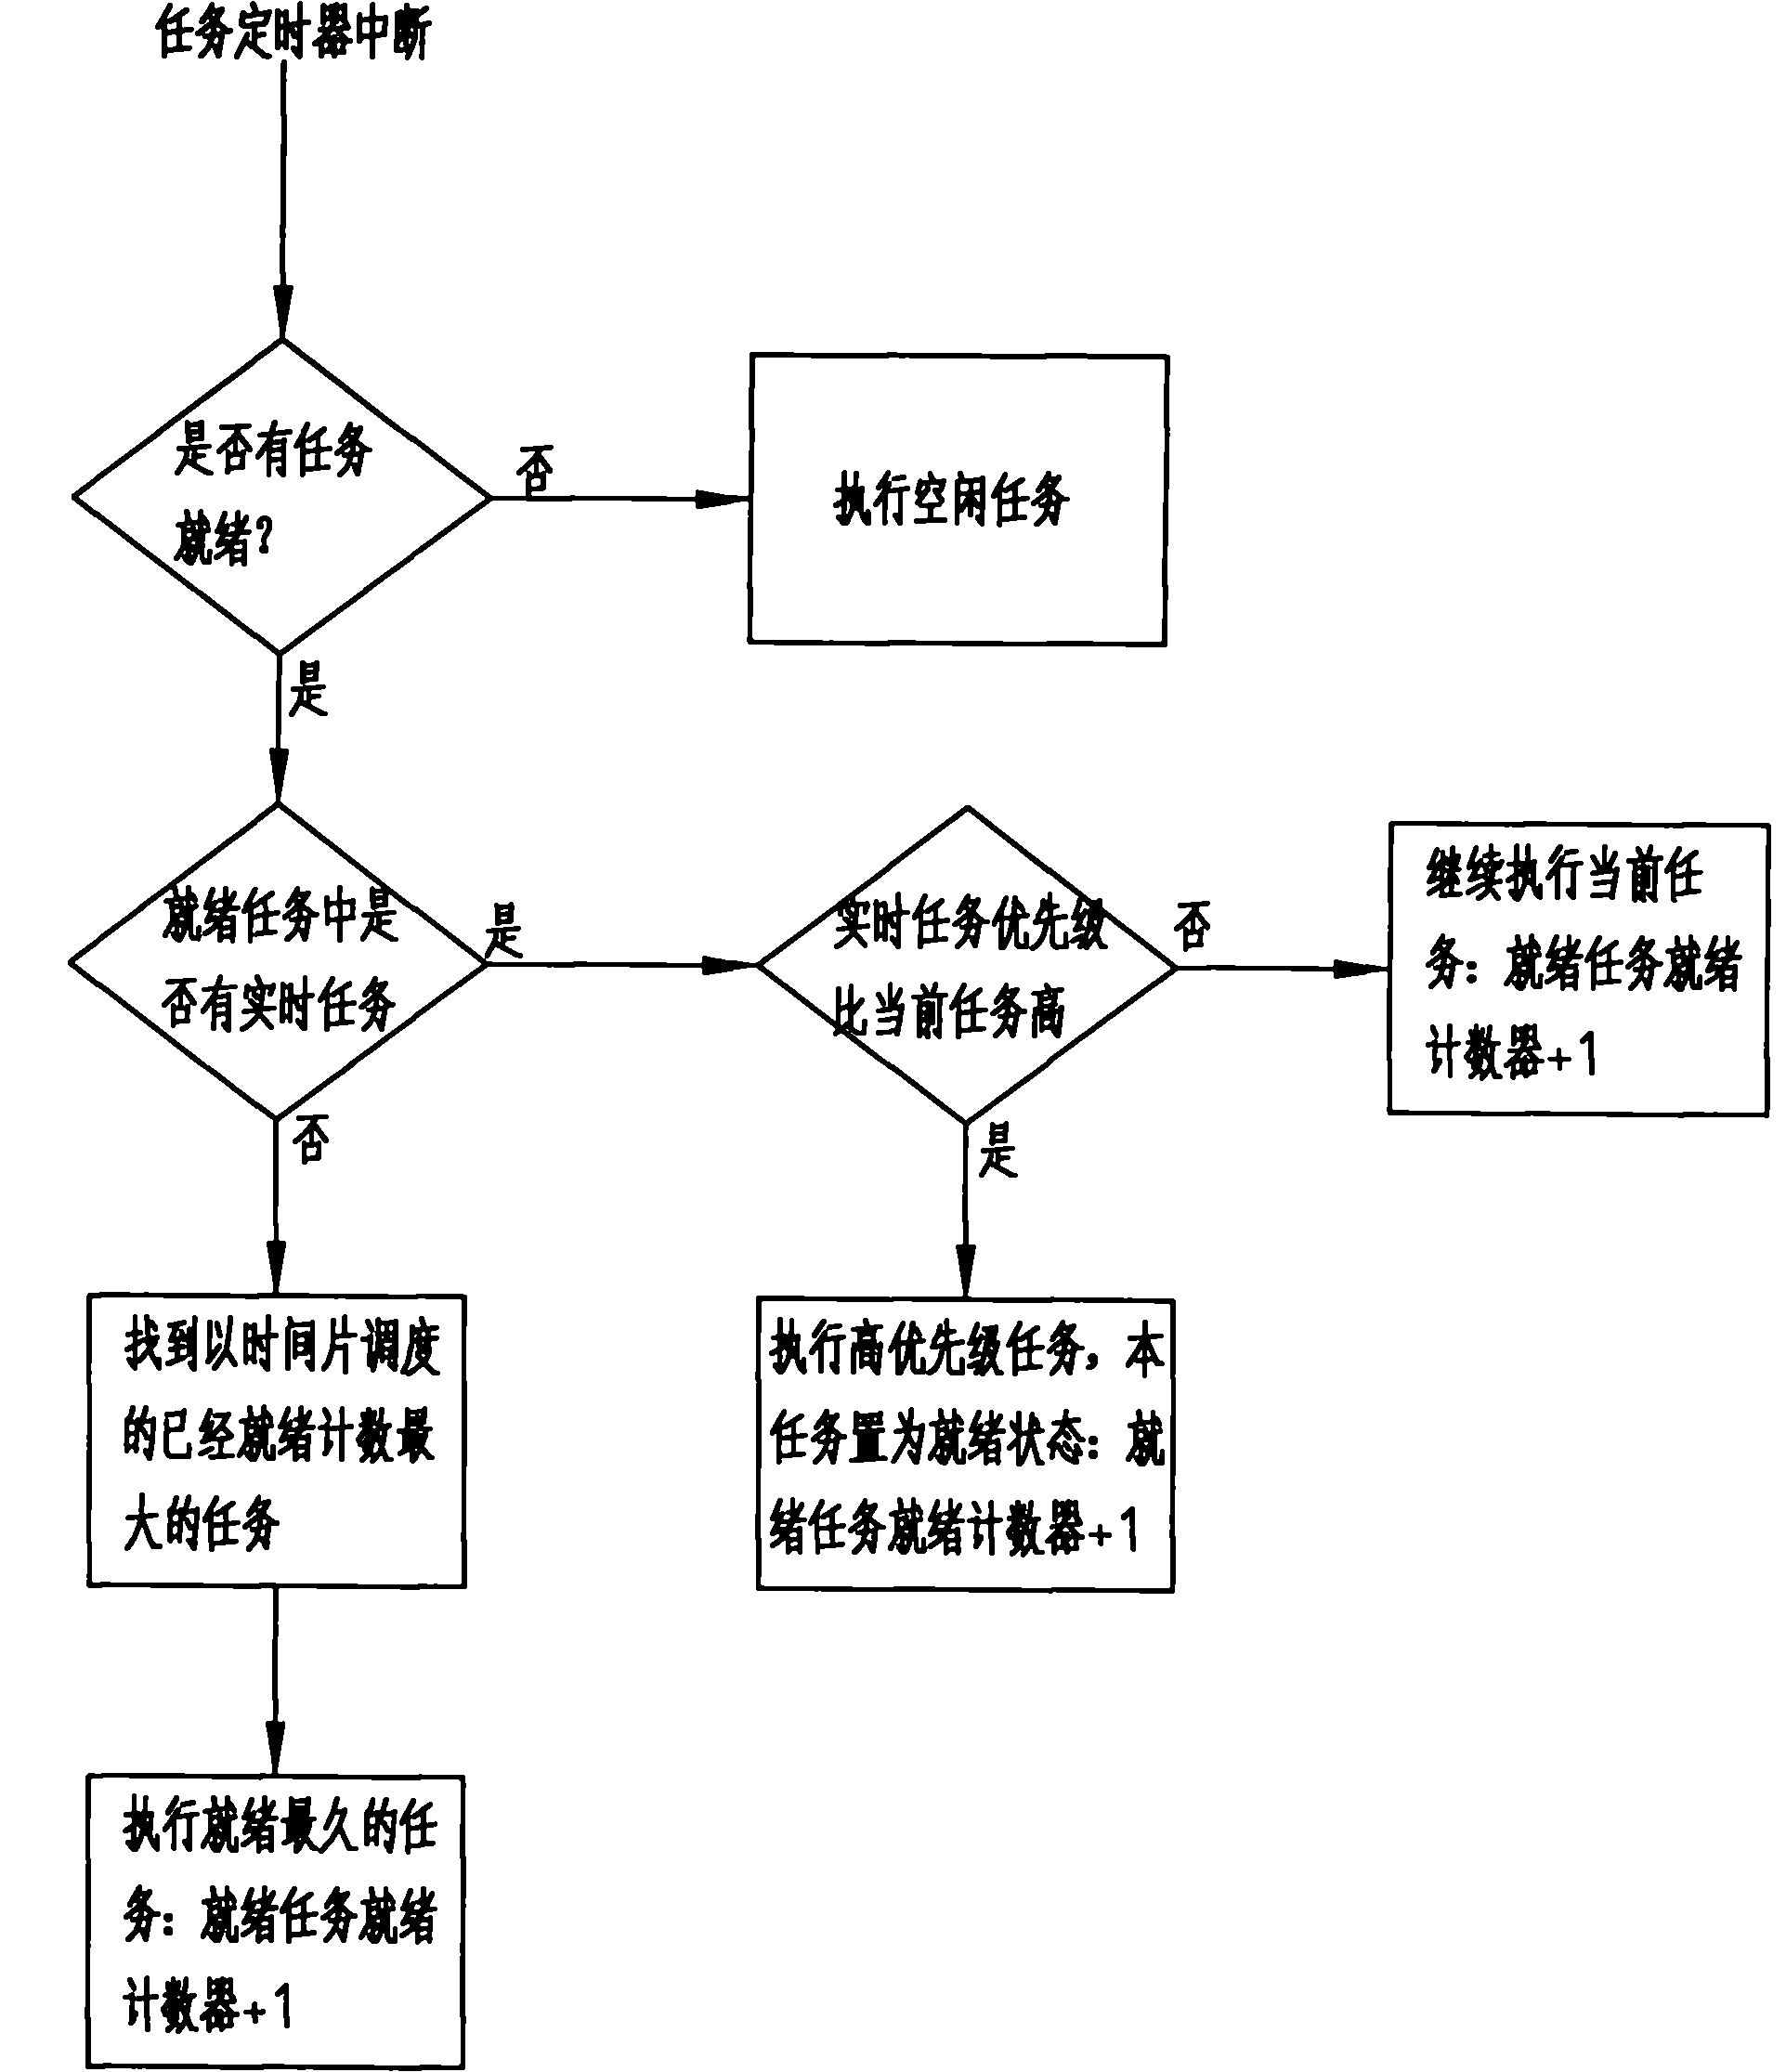 Task scheduling method for embedded operating system